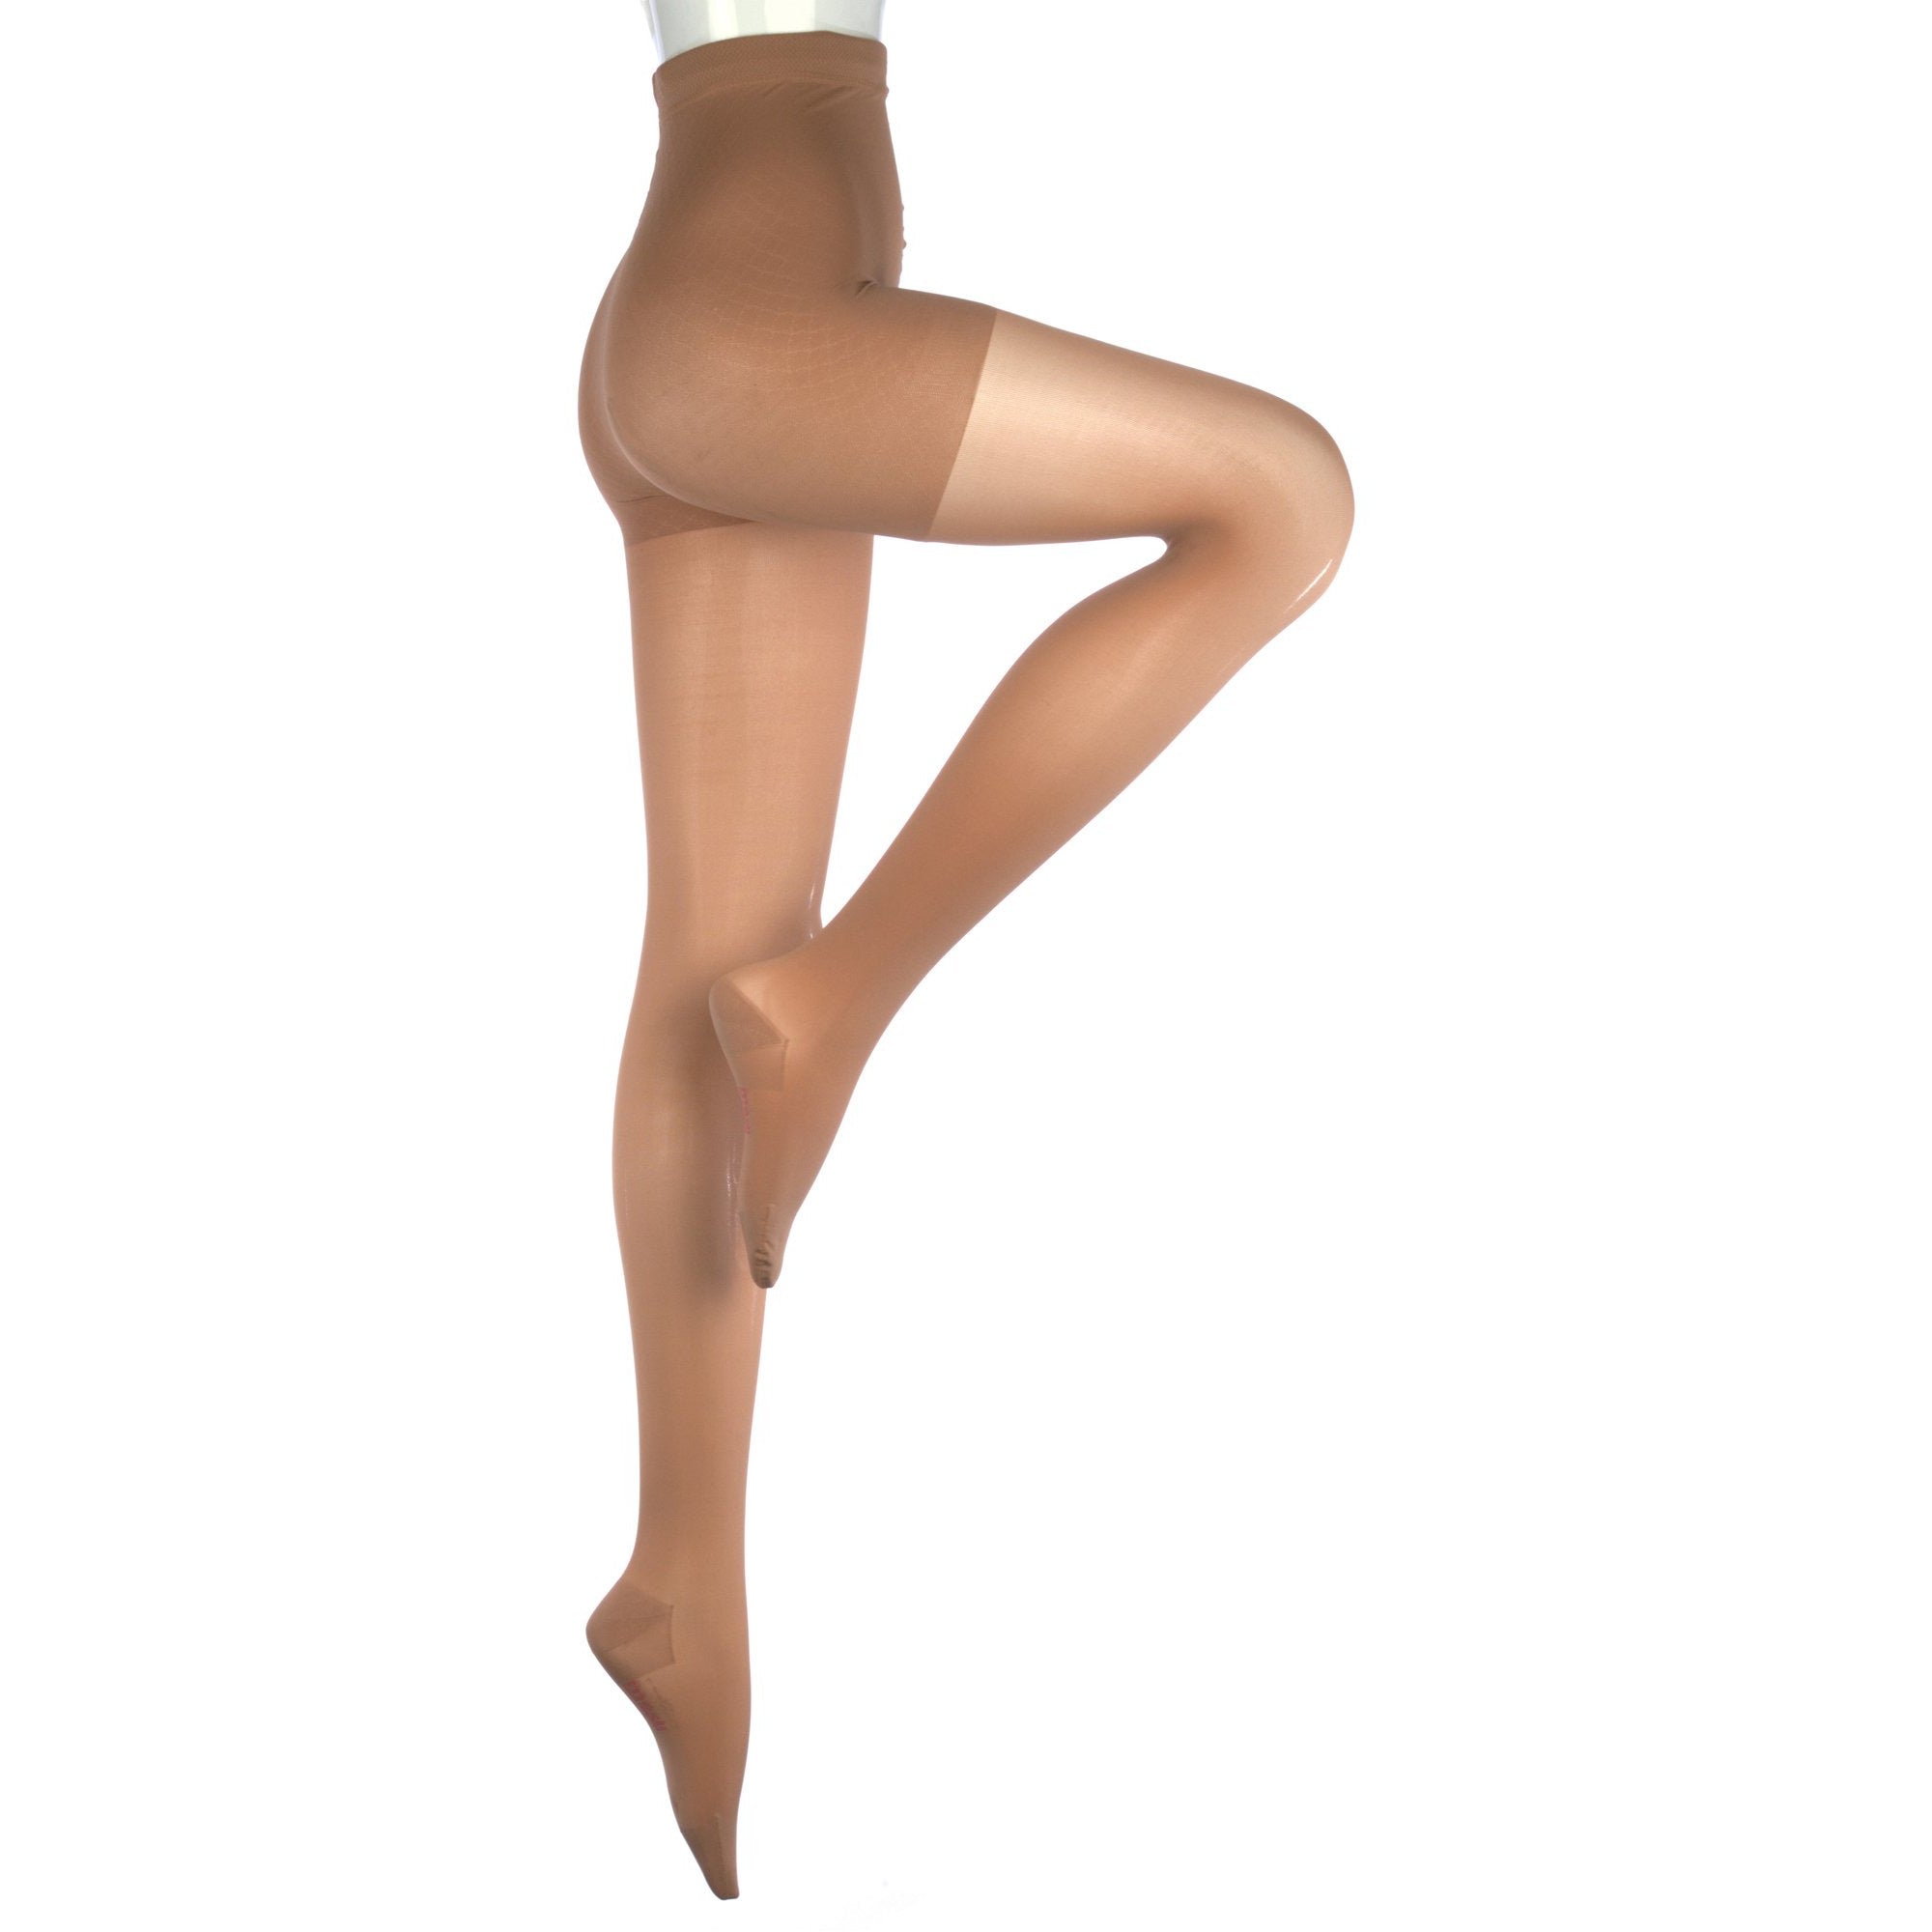 Full Figure Compression Pantyhose 20-30 mmHg For Women's Support